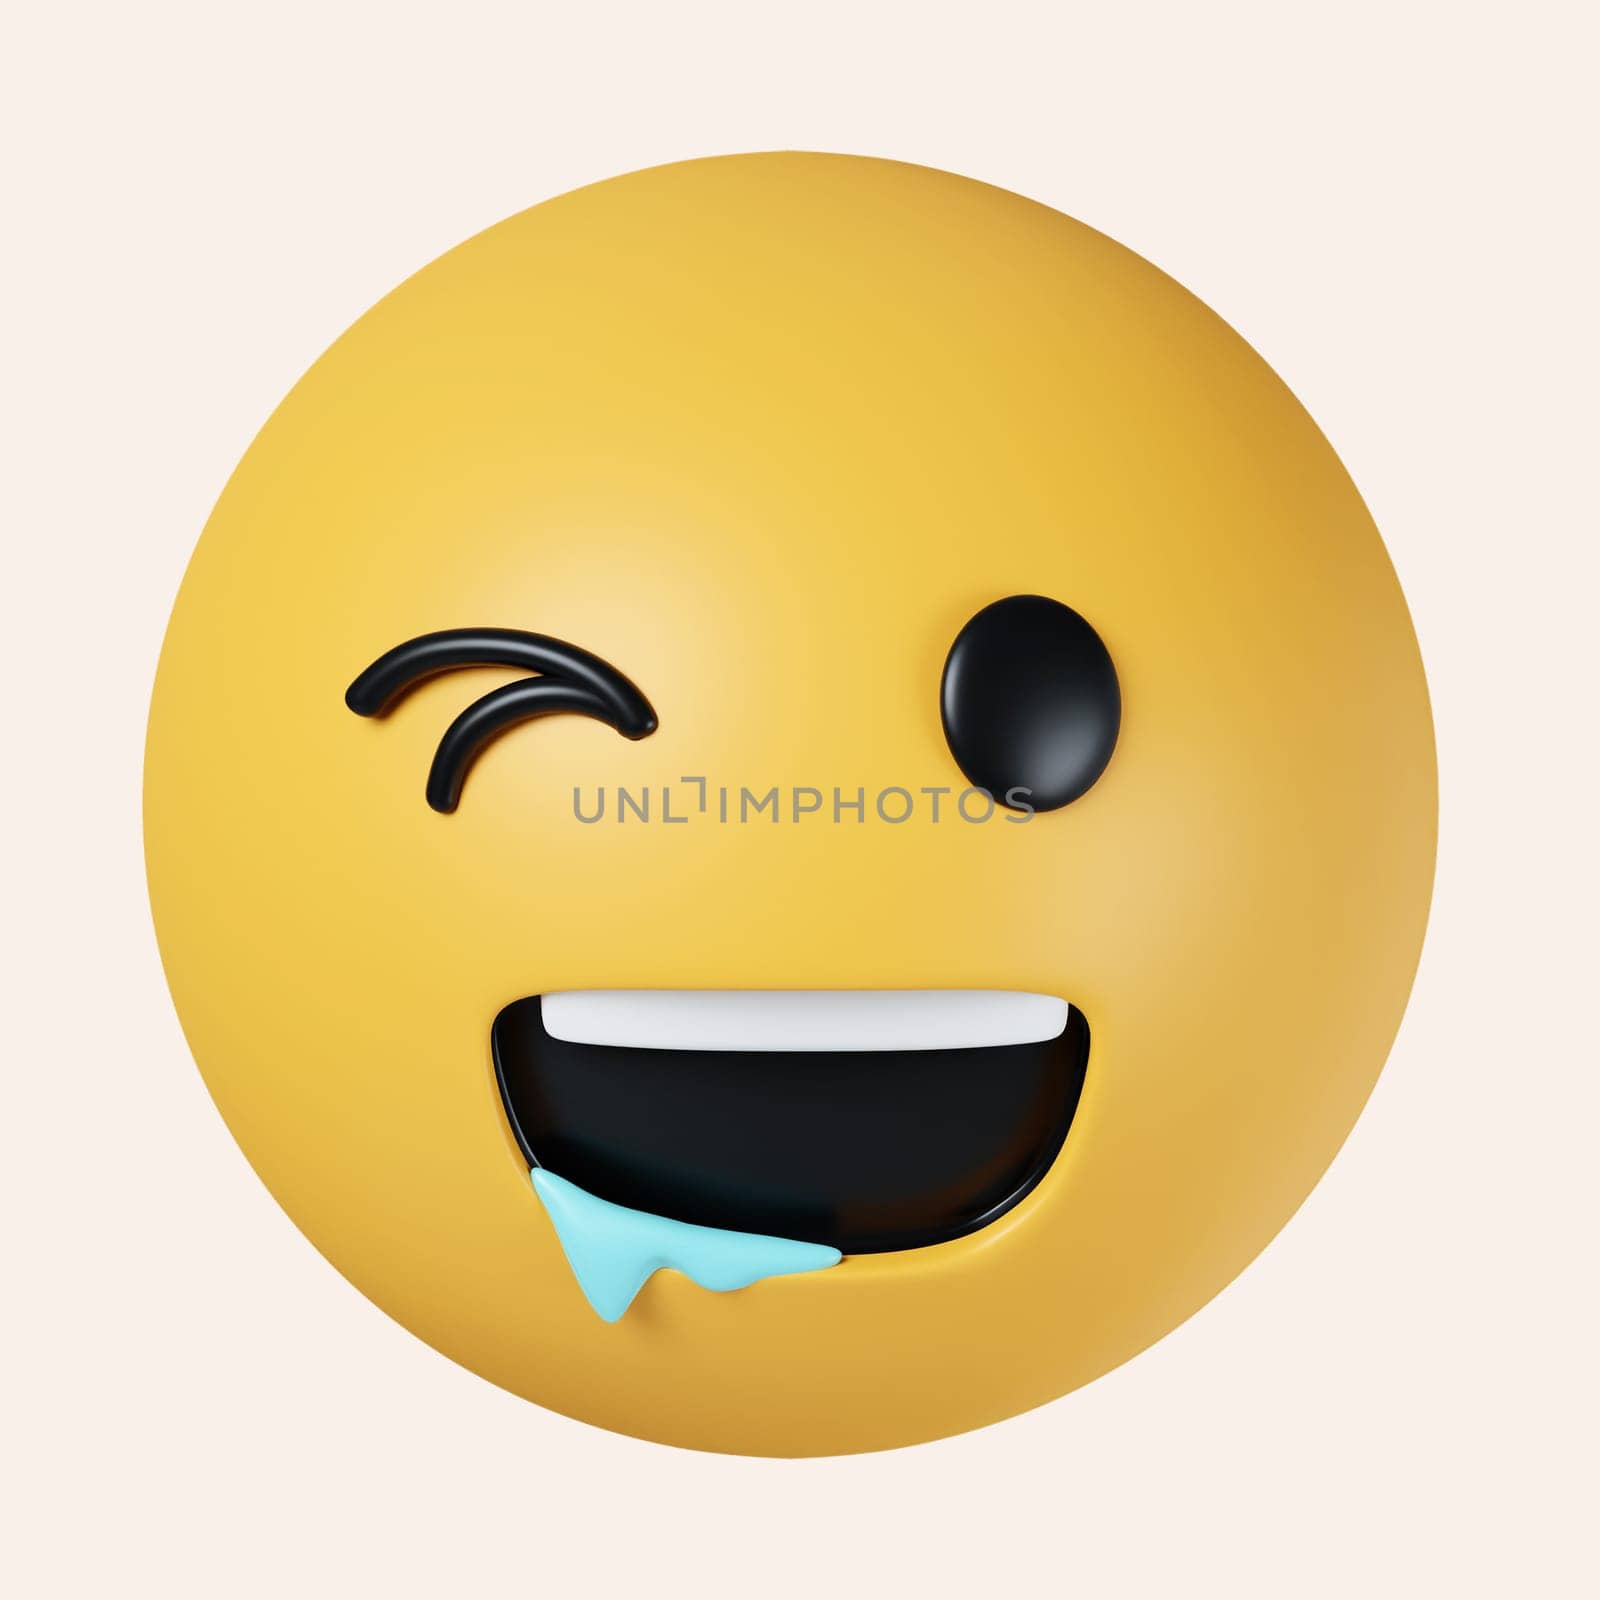 3d Hungry Drooling Face Emoji. Emoticon with saliva from mouth corner. icon isolated on gray background. 3d rendering illustration. Clipping path. by meepiangraphic